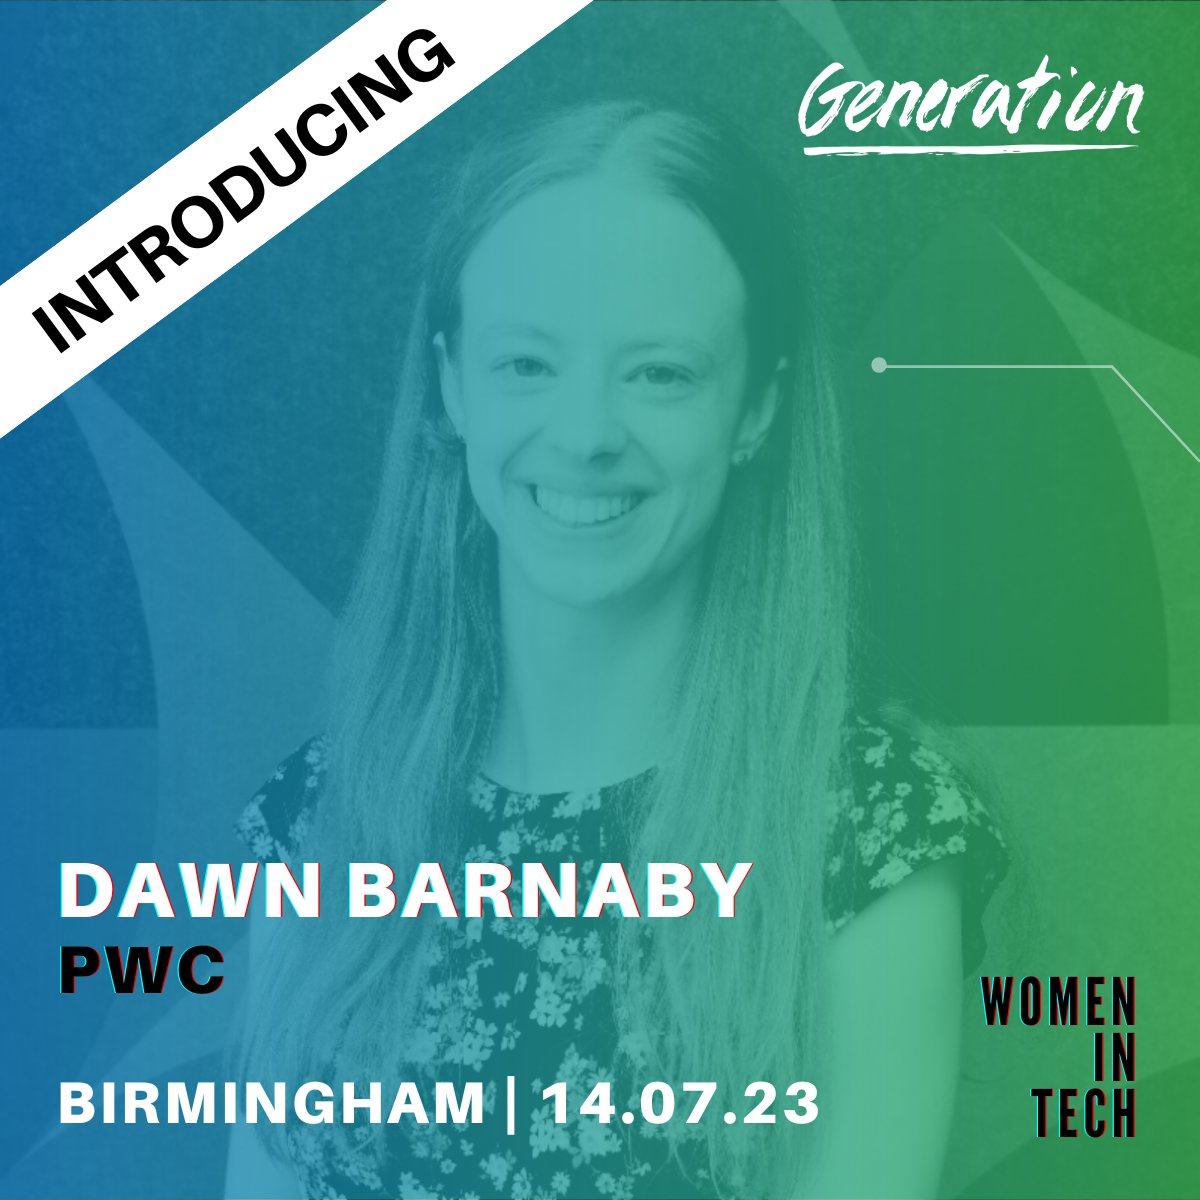 📣 Introducing speakers for this Friday's #WomenInTech event in #Birmingham (or online!) supported by @MicrosoftUK. Thrilled to have @IrinaKamalova & @dawn_barnaby with us! No tech experience needed to join us for this fun info session. Sign up here 👉 bit.ly/women-in-tech-…